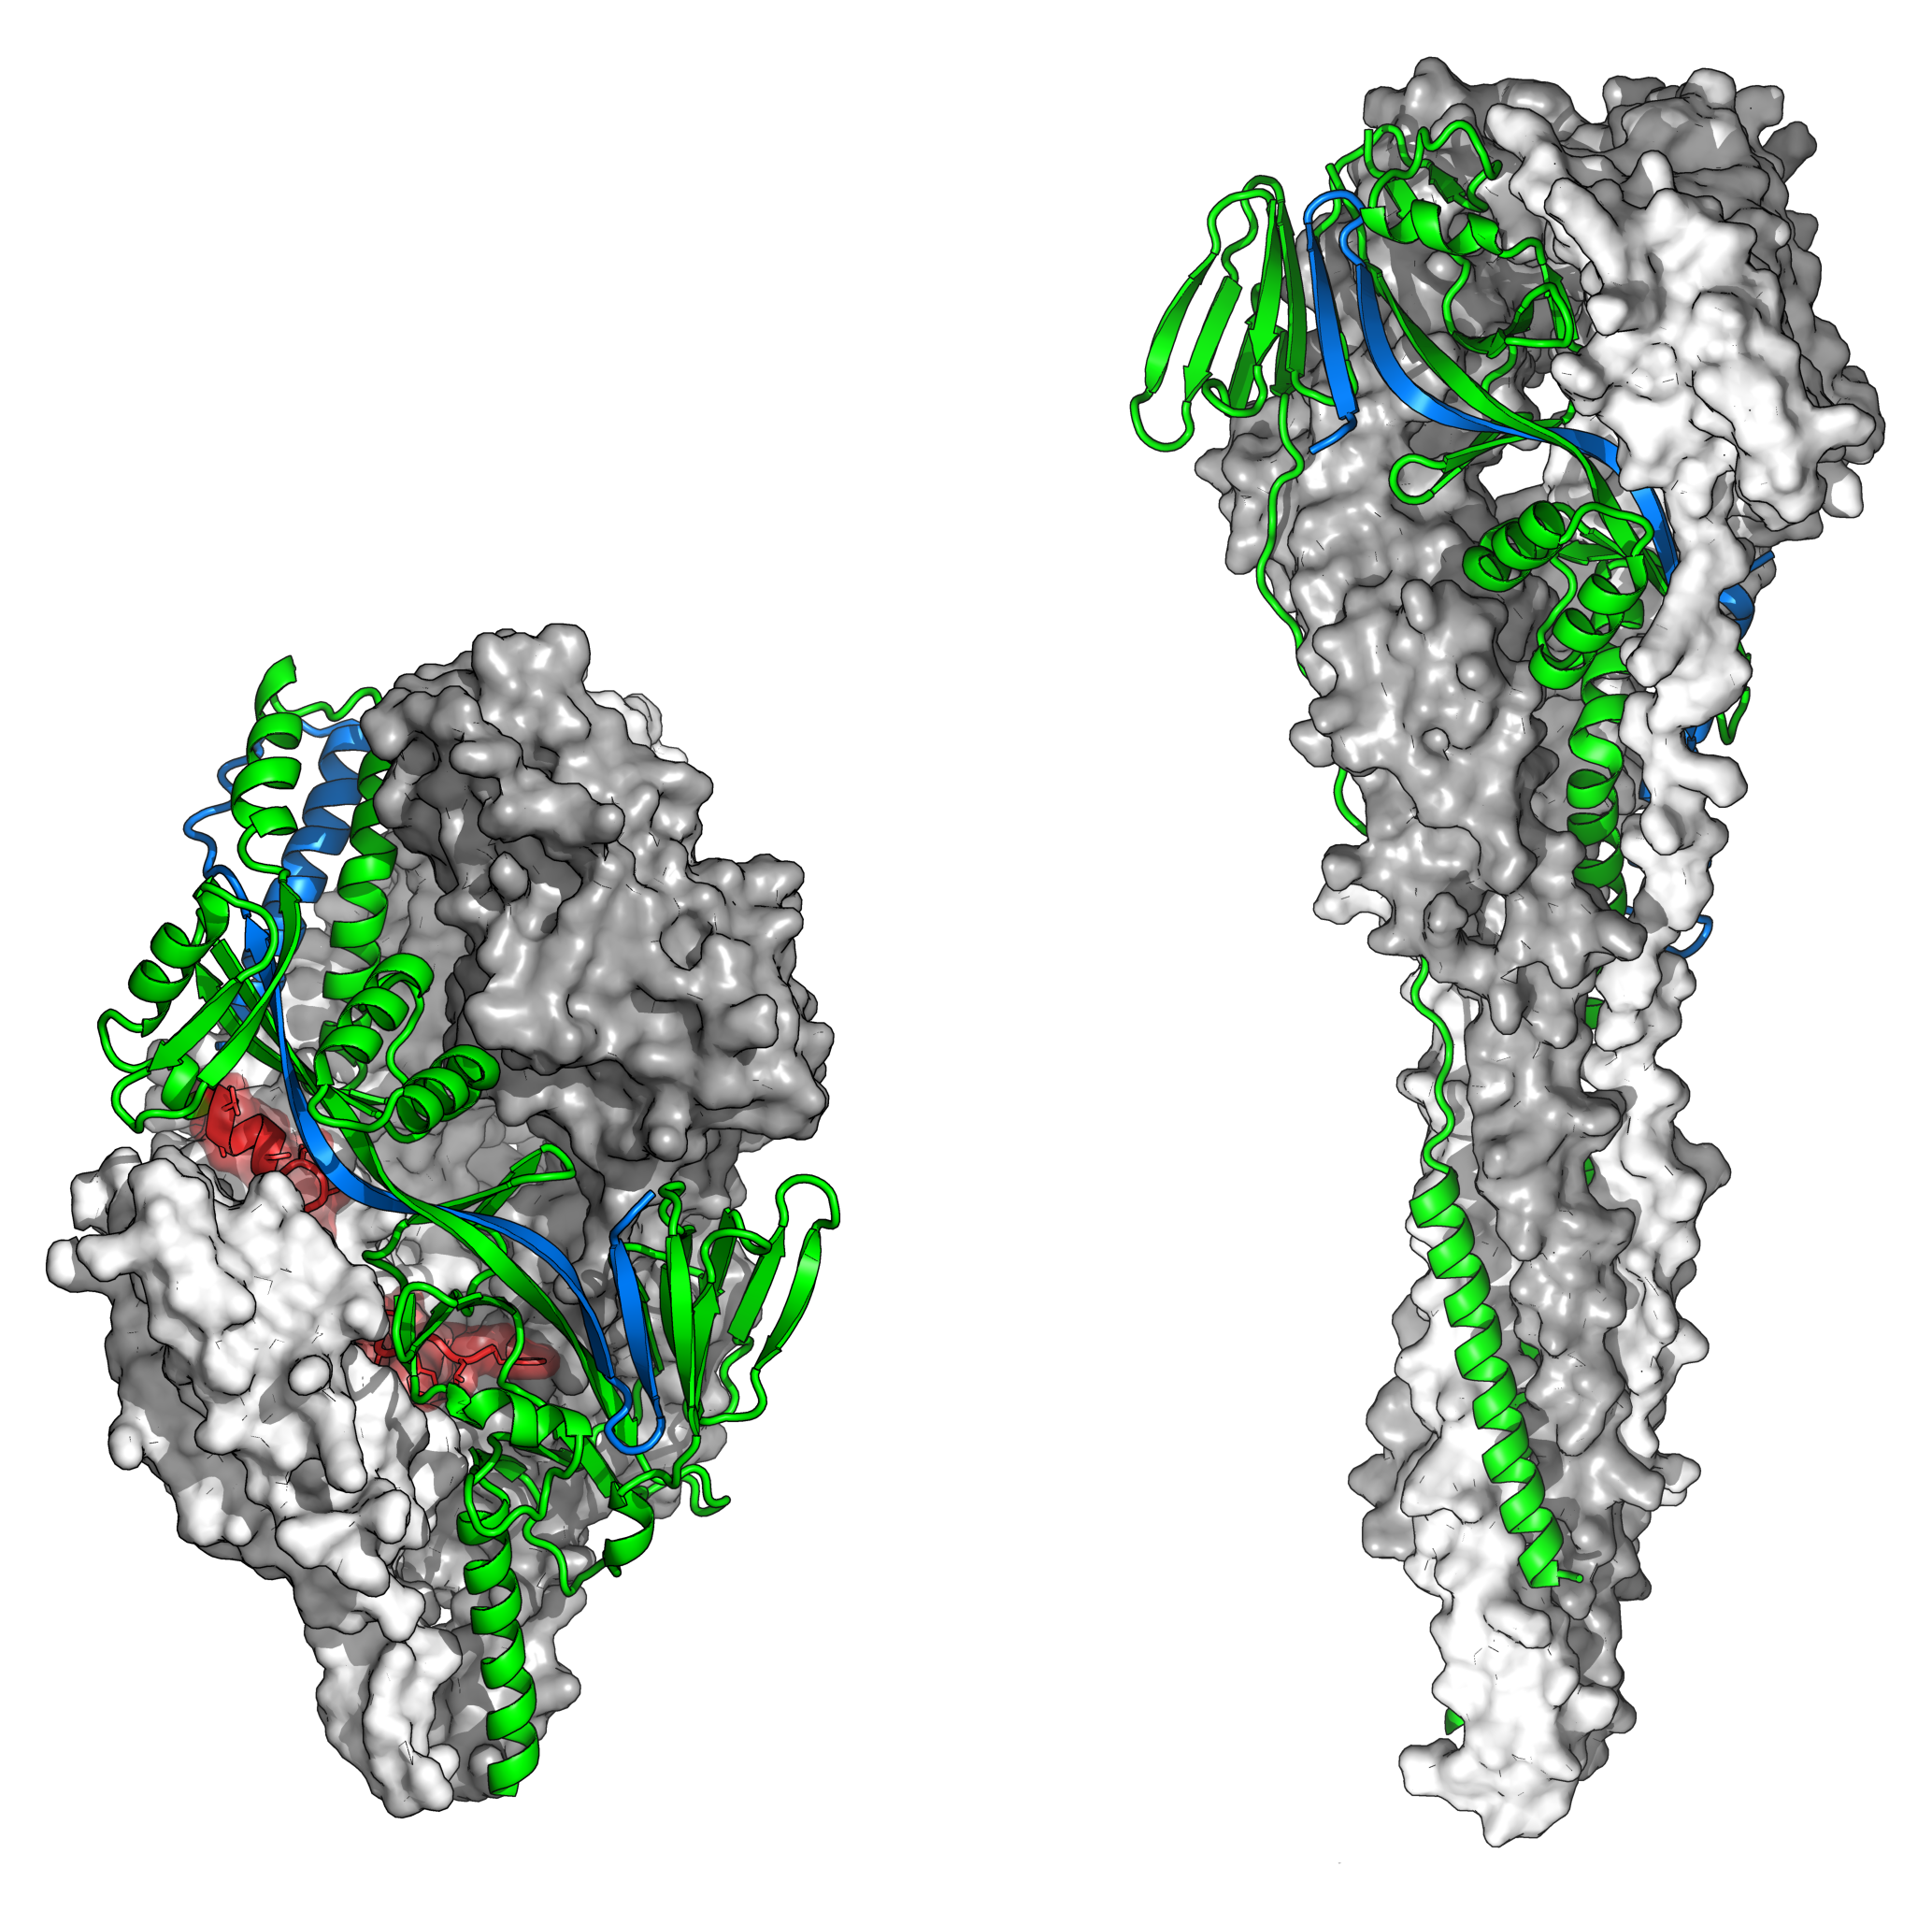 Illustrations of the f protein from respiratory syncitial virus in prefusion and postfusion shapes